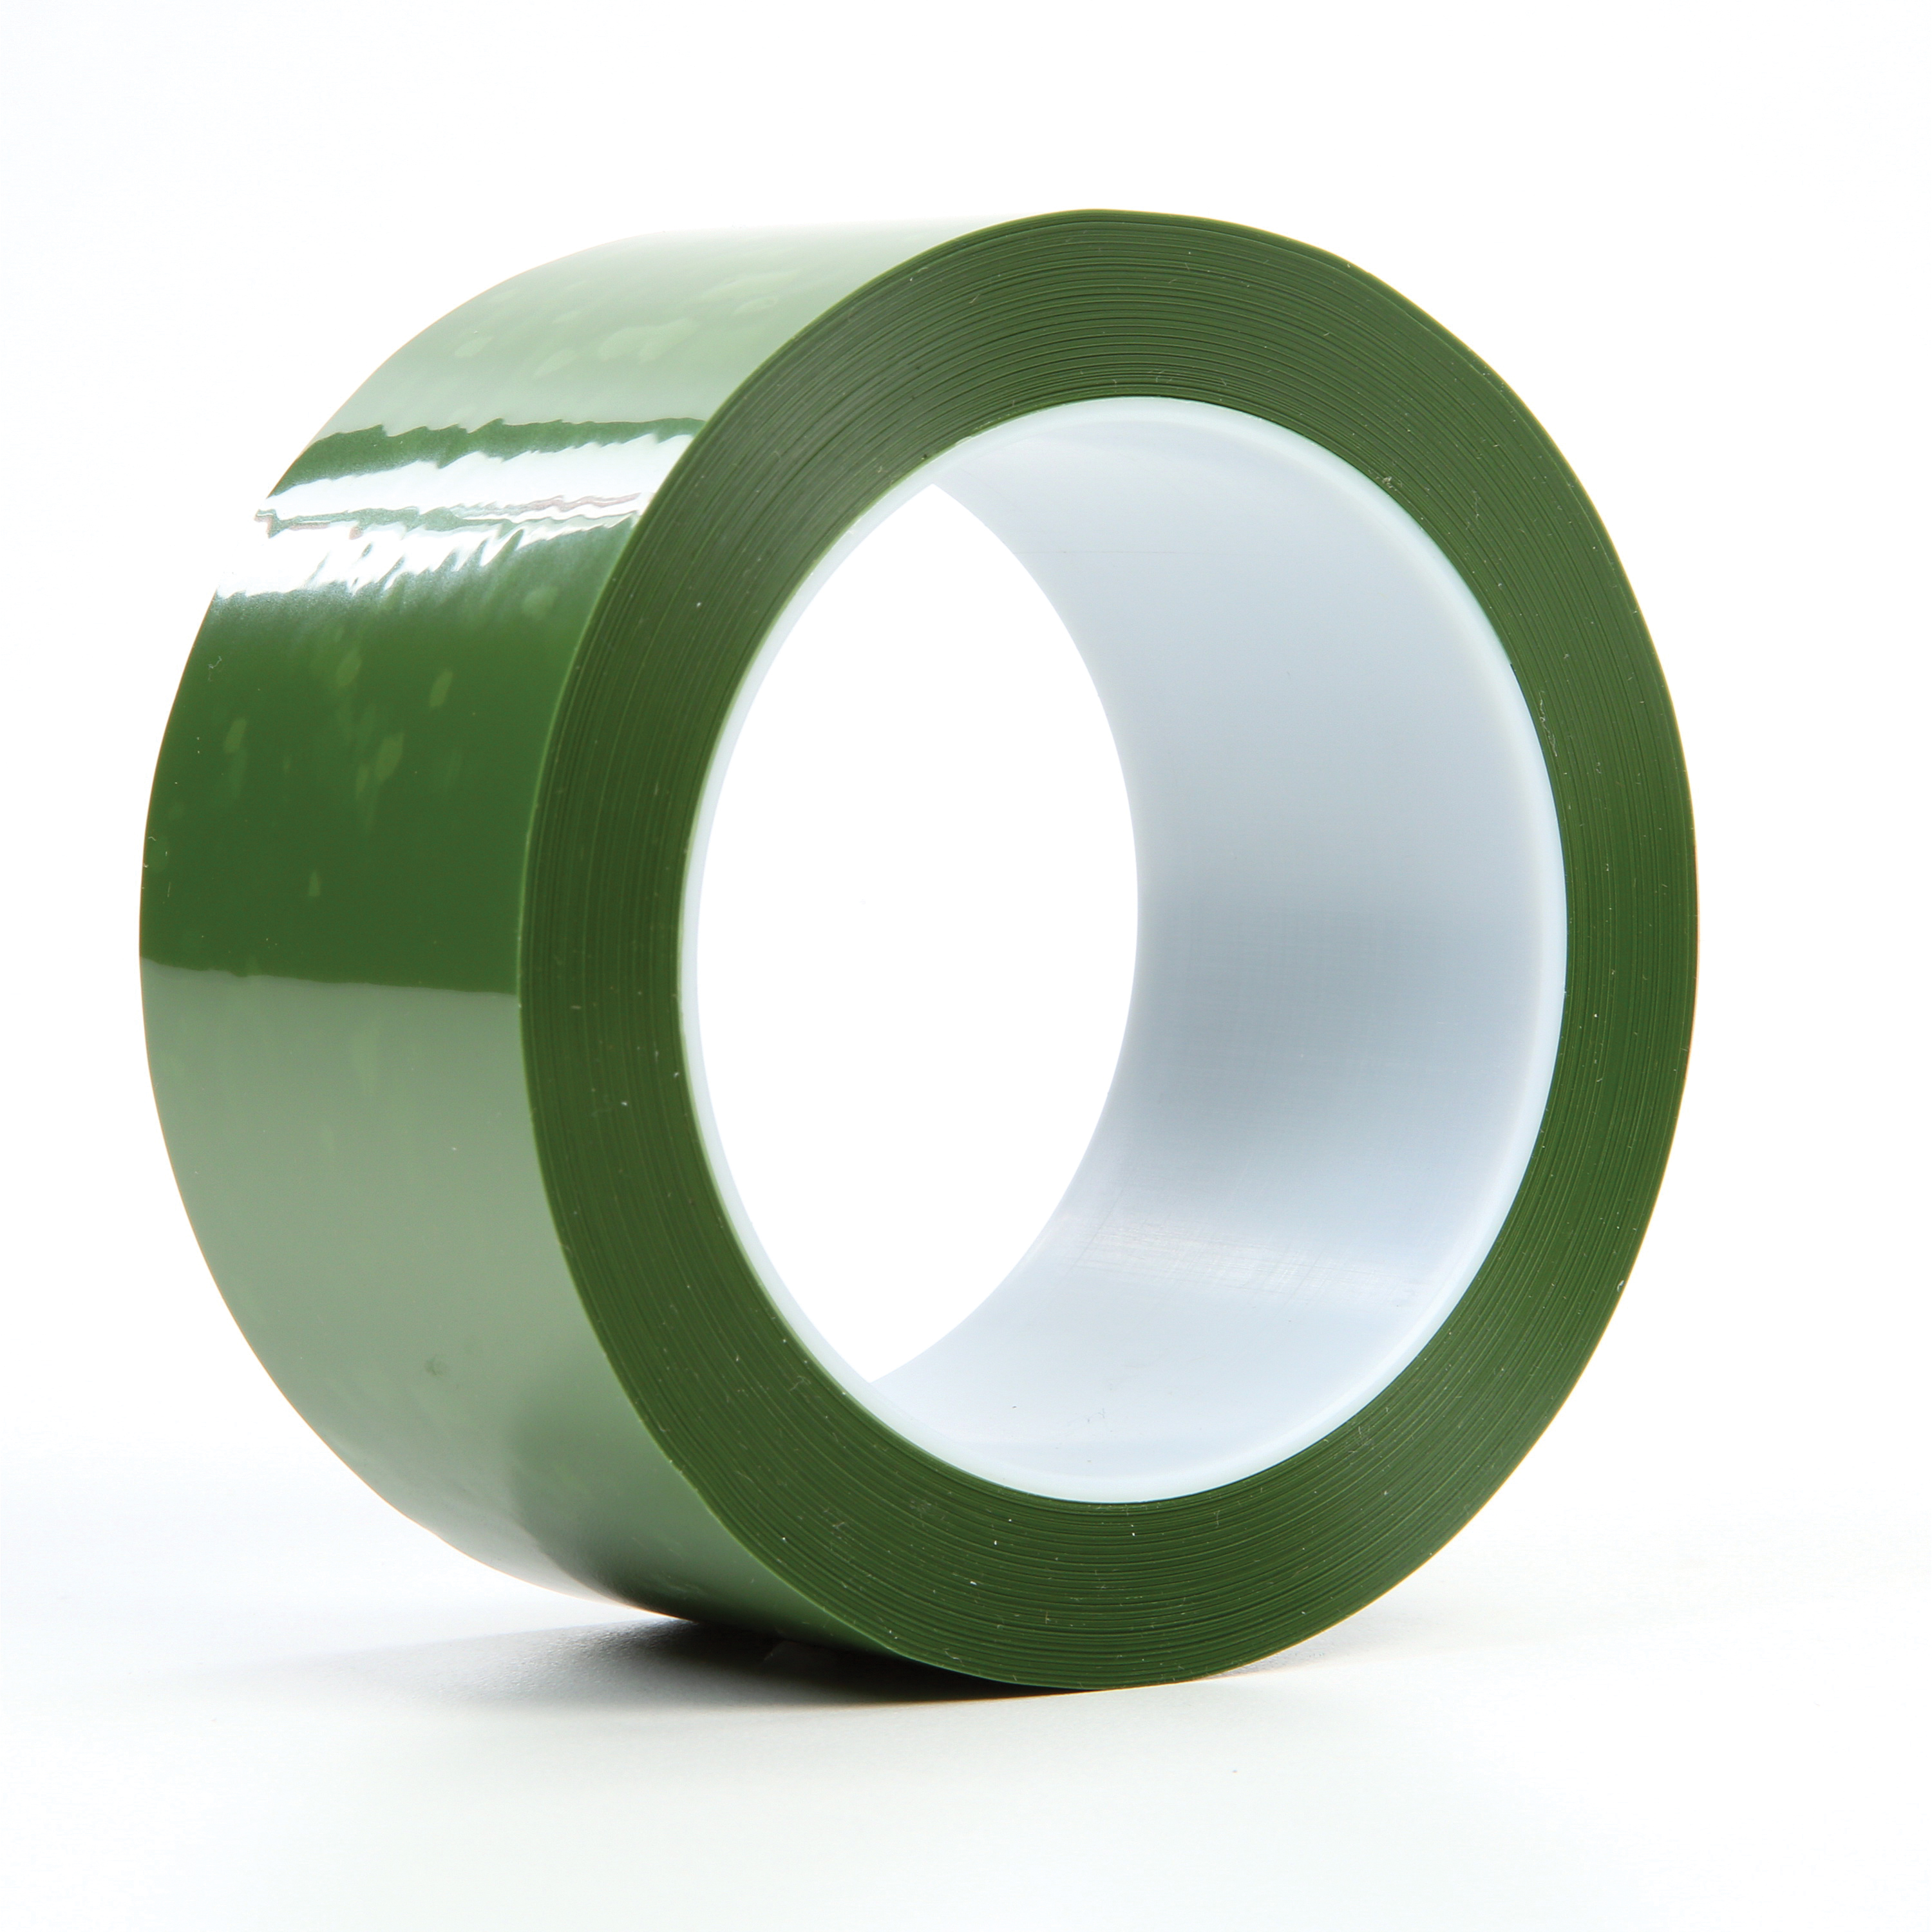 3M™ 021200-61460 Tear-Resistant Masking Tape, 72 yd L x 2 in W, 2.4 mil THK, Silicon Adhesive, Polyester Backing